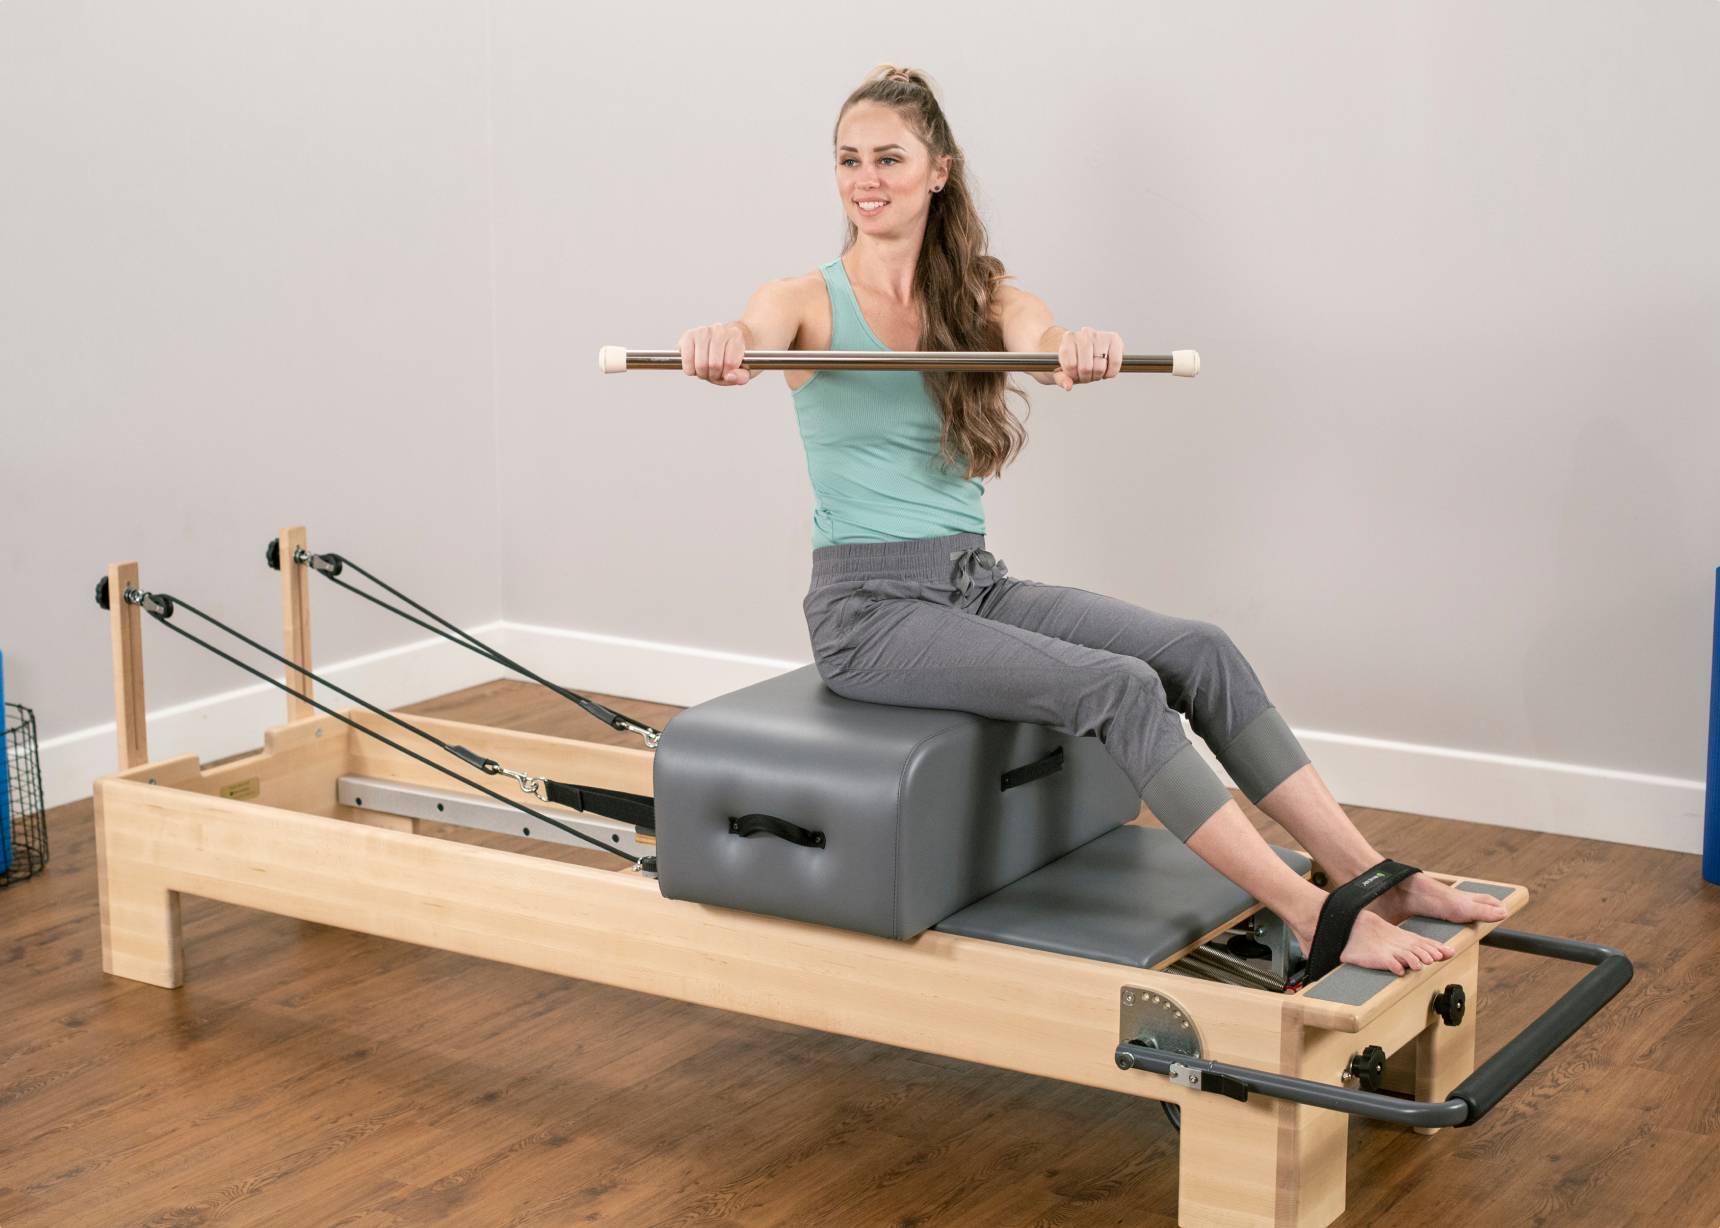 A woman exercising on a contour sitting box, using a maple dowel and attached Pilates foot straps.